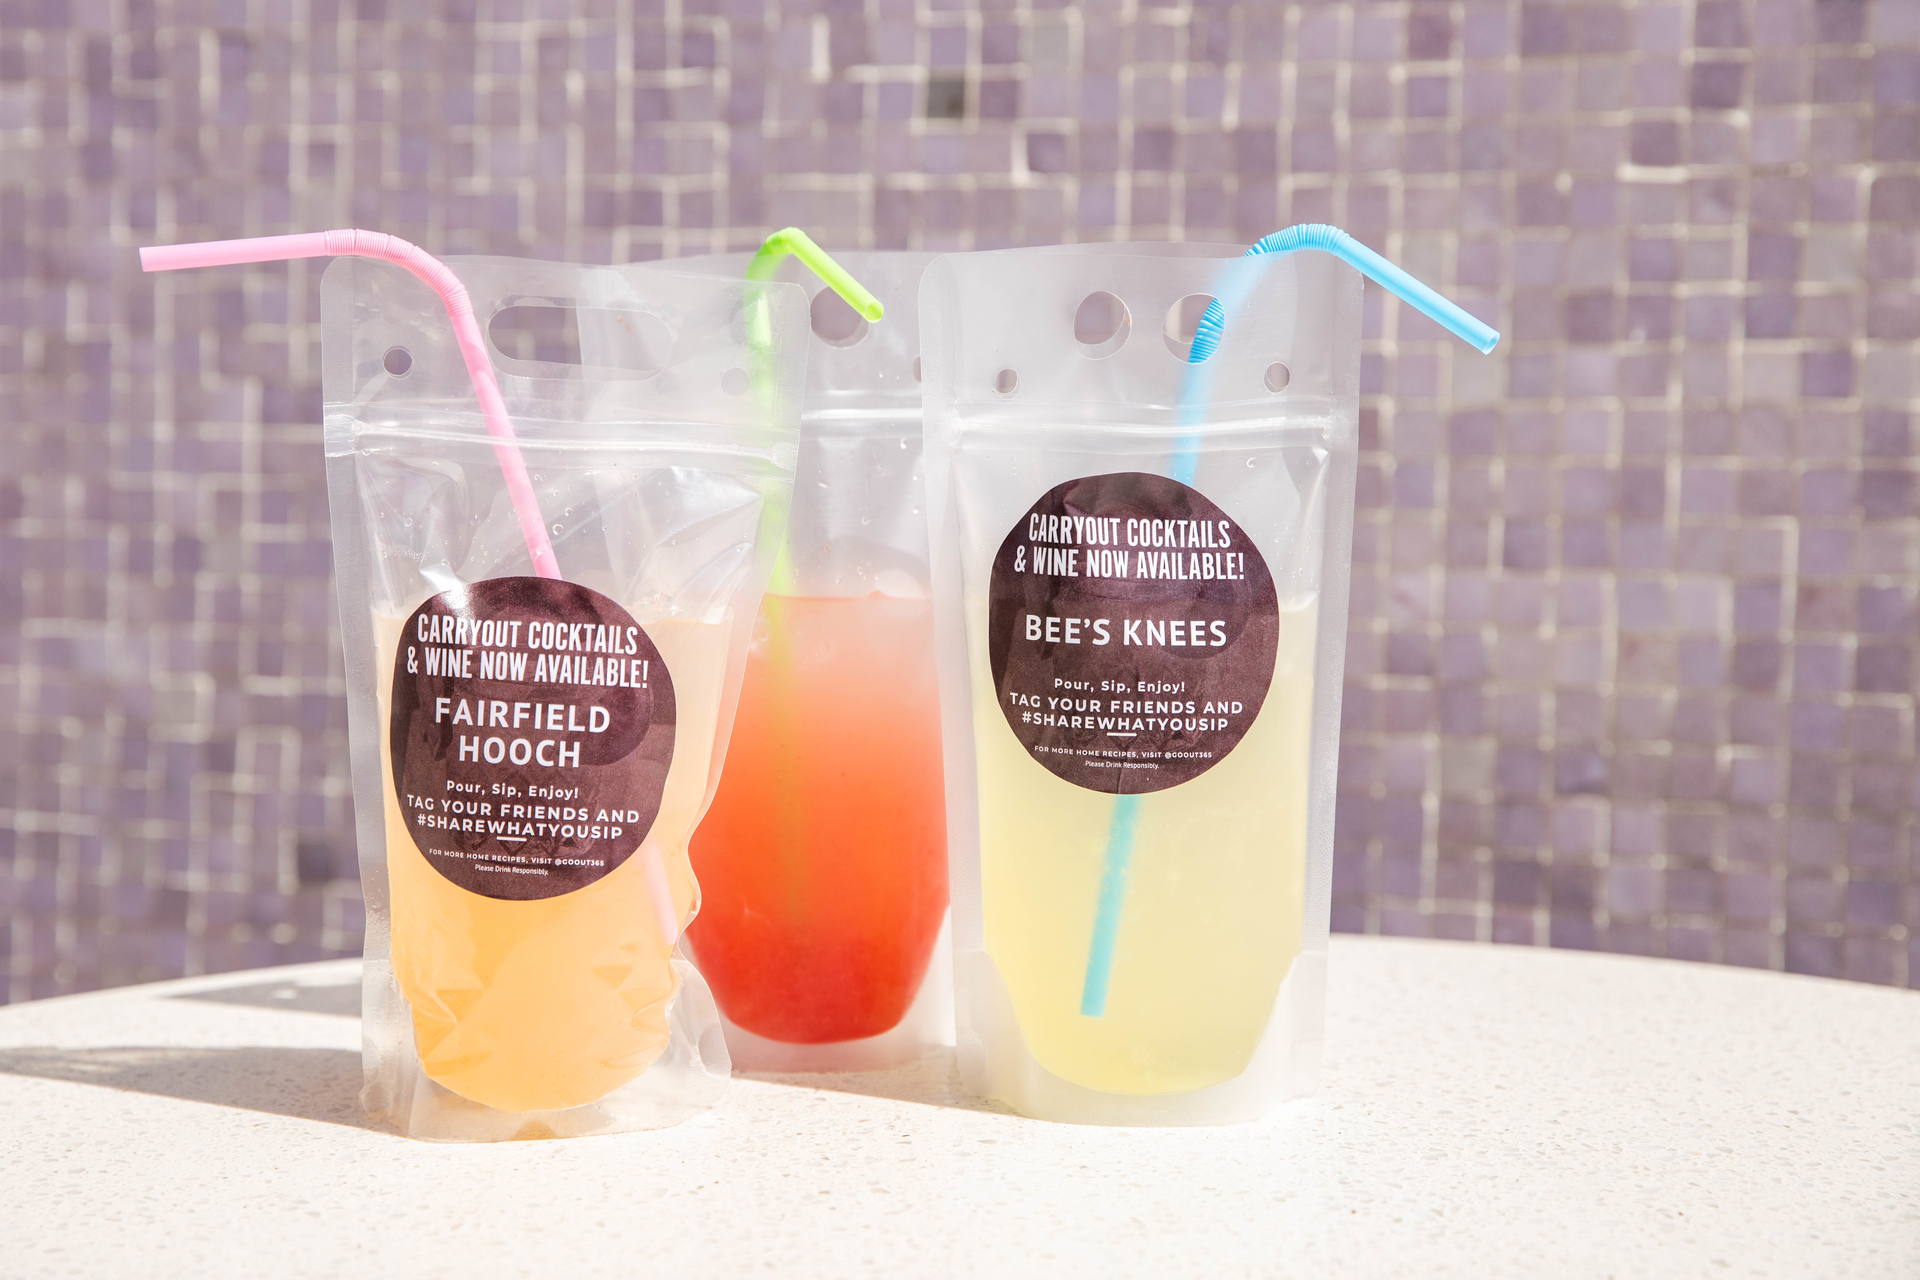 Cocktail Pouches for Easy Summer Drinks